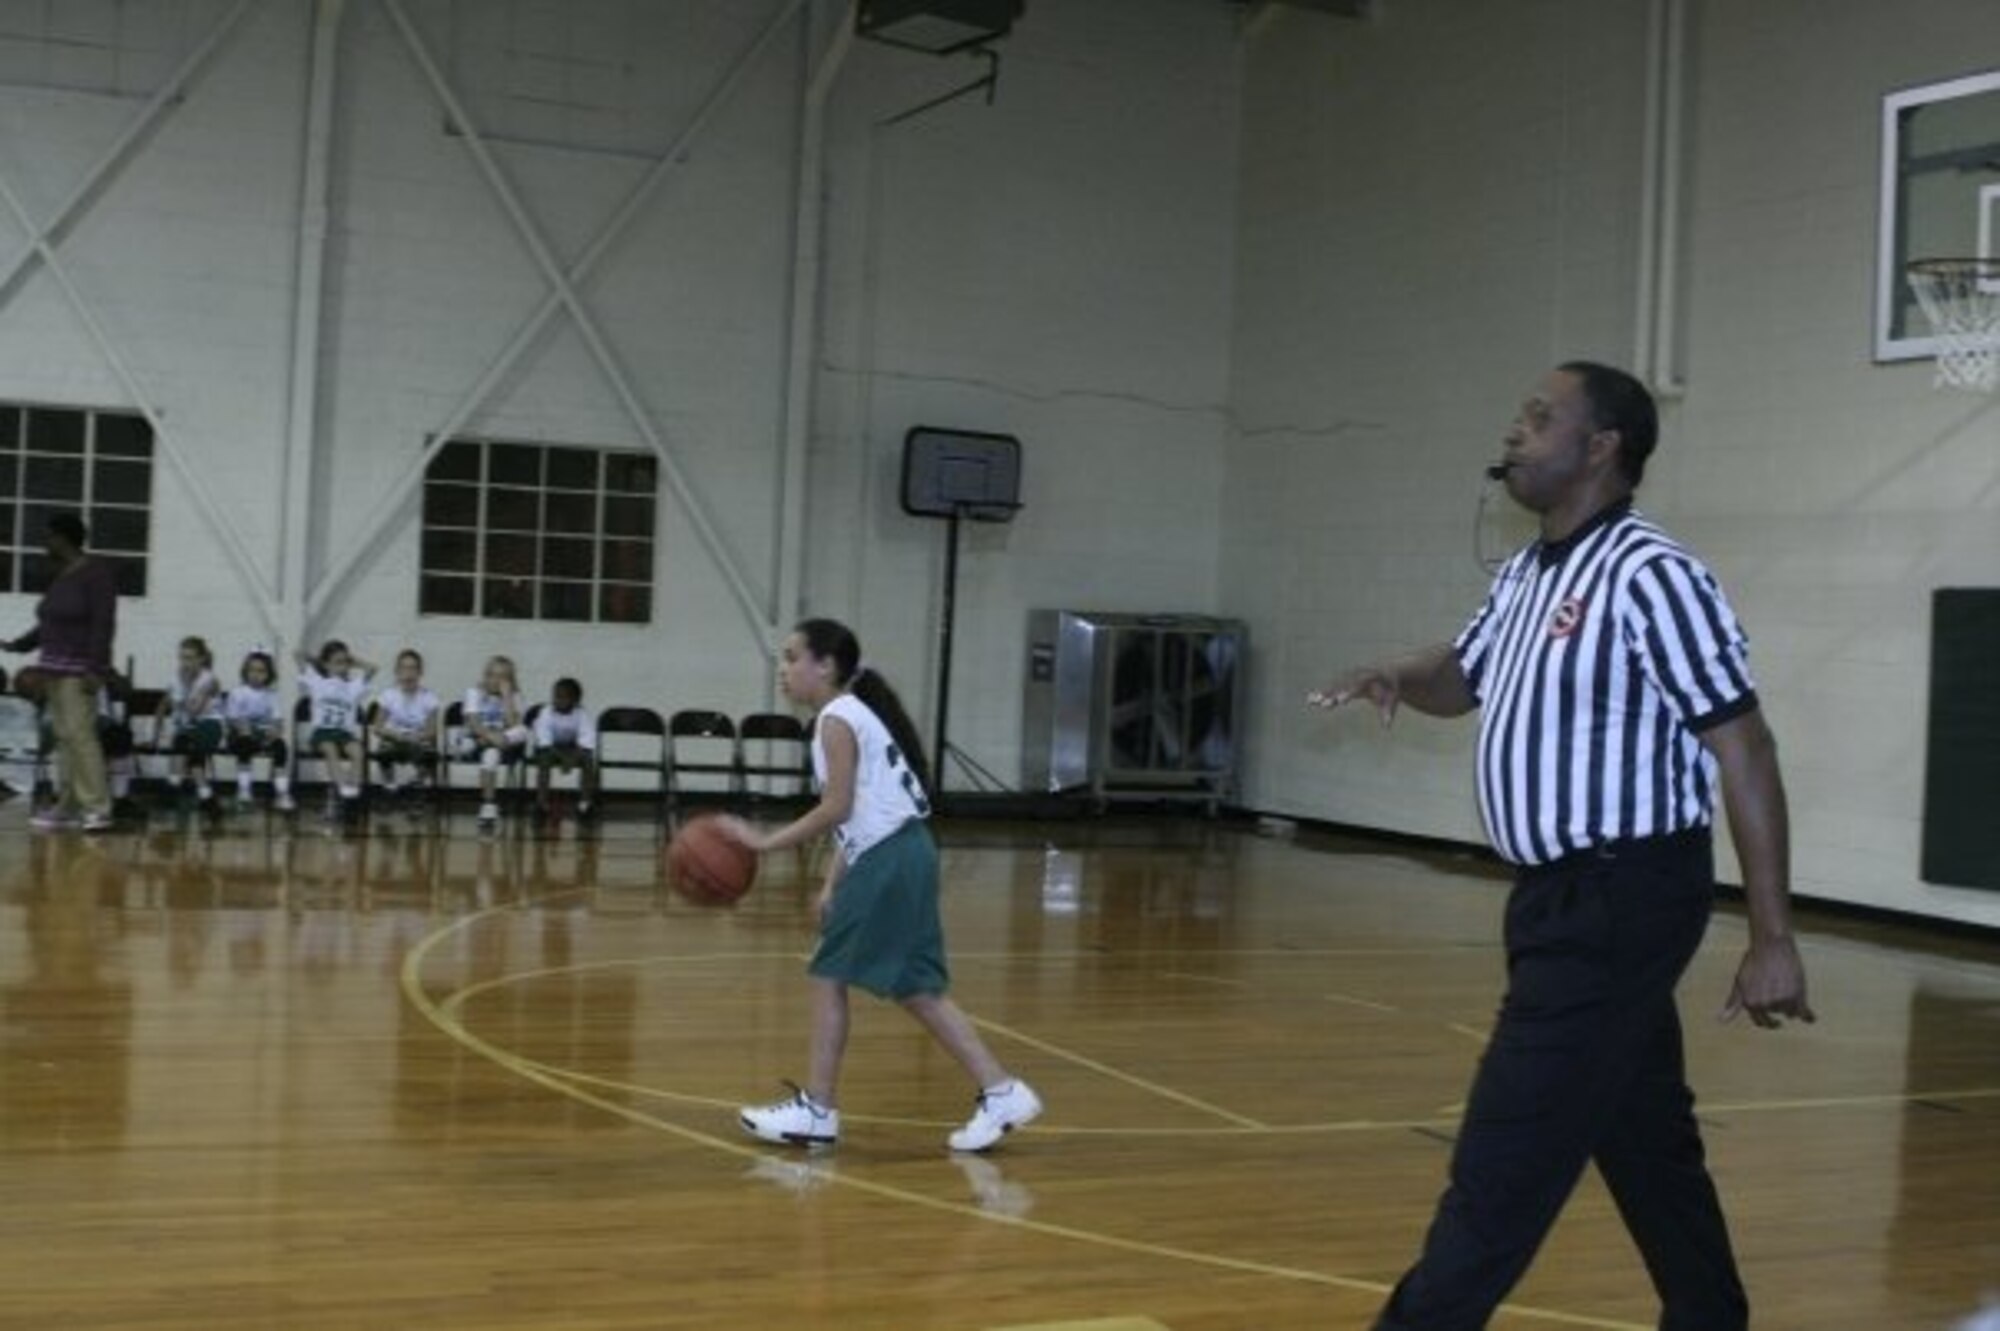 Maverick Mosley, a journeyman boilermaker who has been employed at Arnold for 39 years, keeps his whistle at the ready while officiating a local basketball game. Mosley is one of several Arnold employees who also works as sports officials. (Photo by Andrea Stephens)